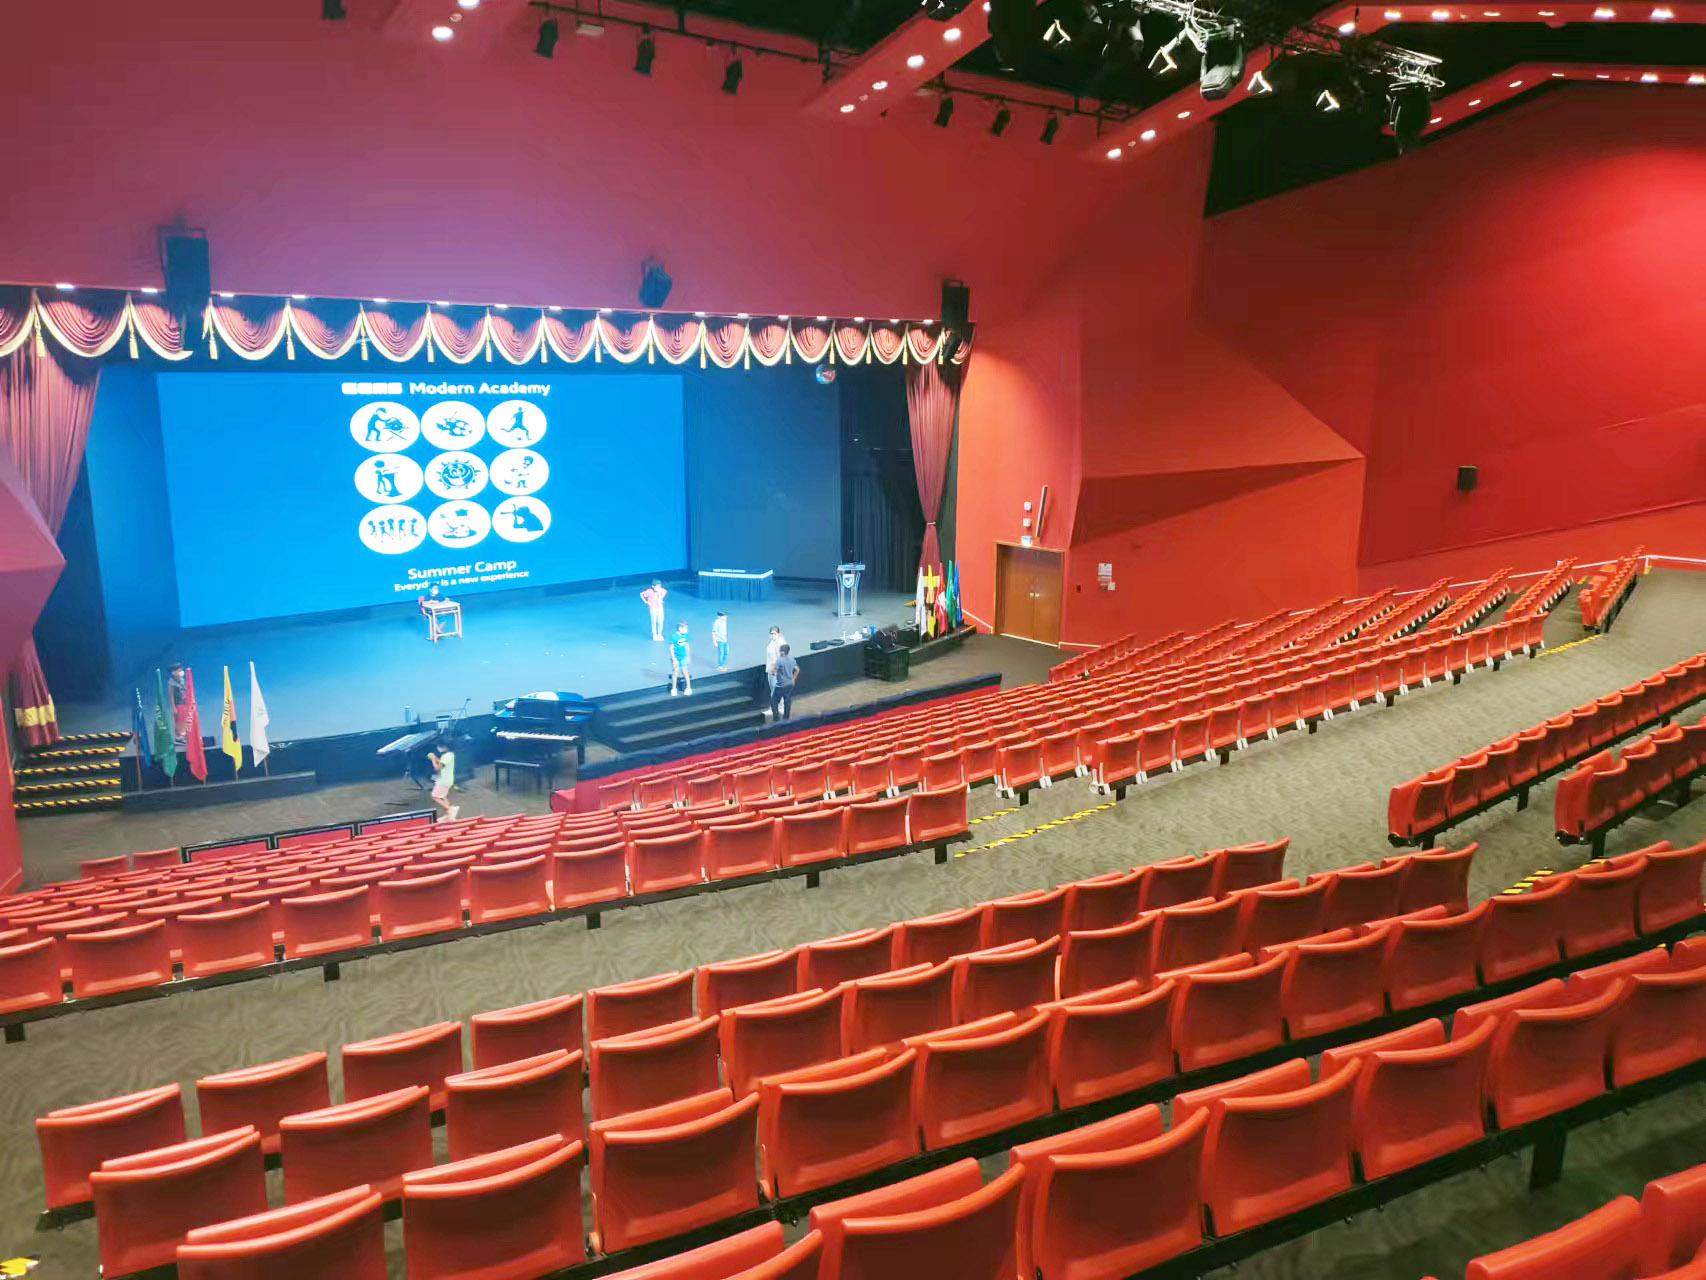 Case study_LED display from Hikvision gives a school auditorium the wow factor Banner 2